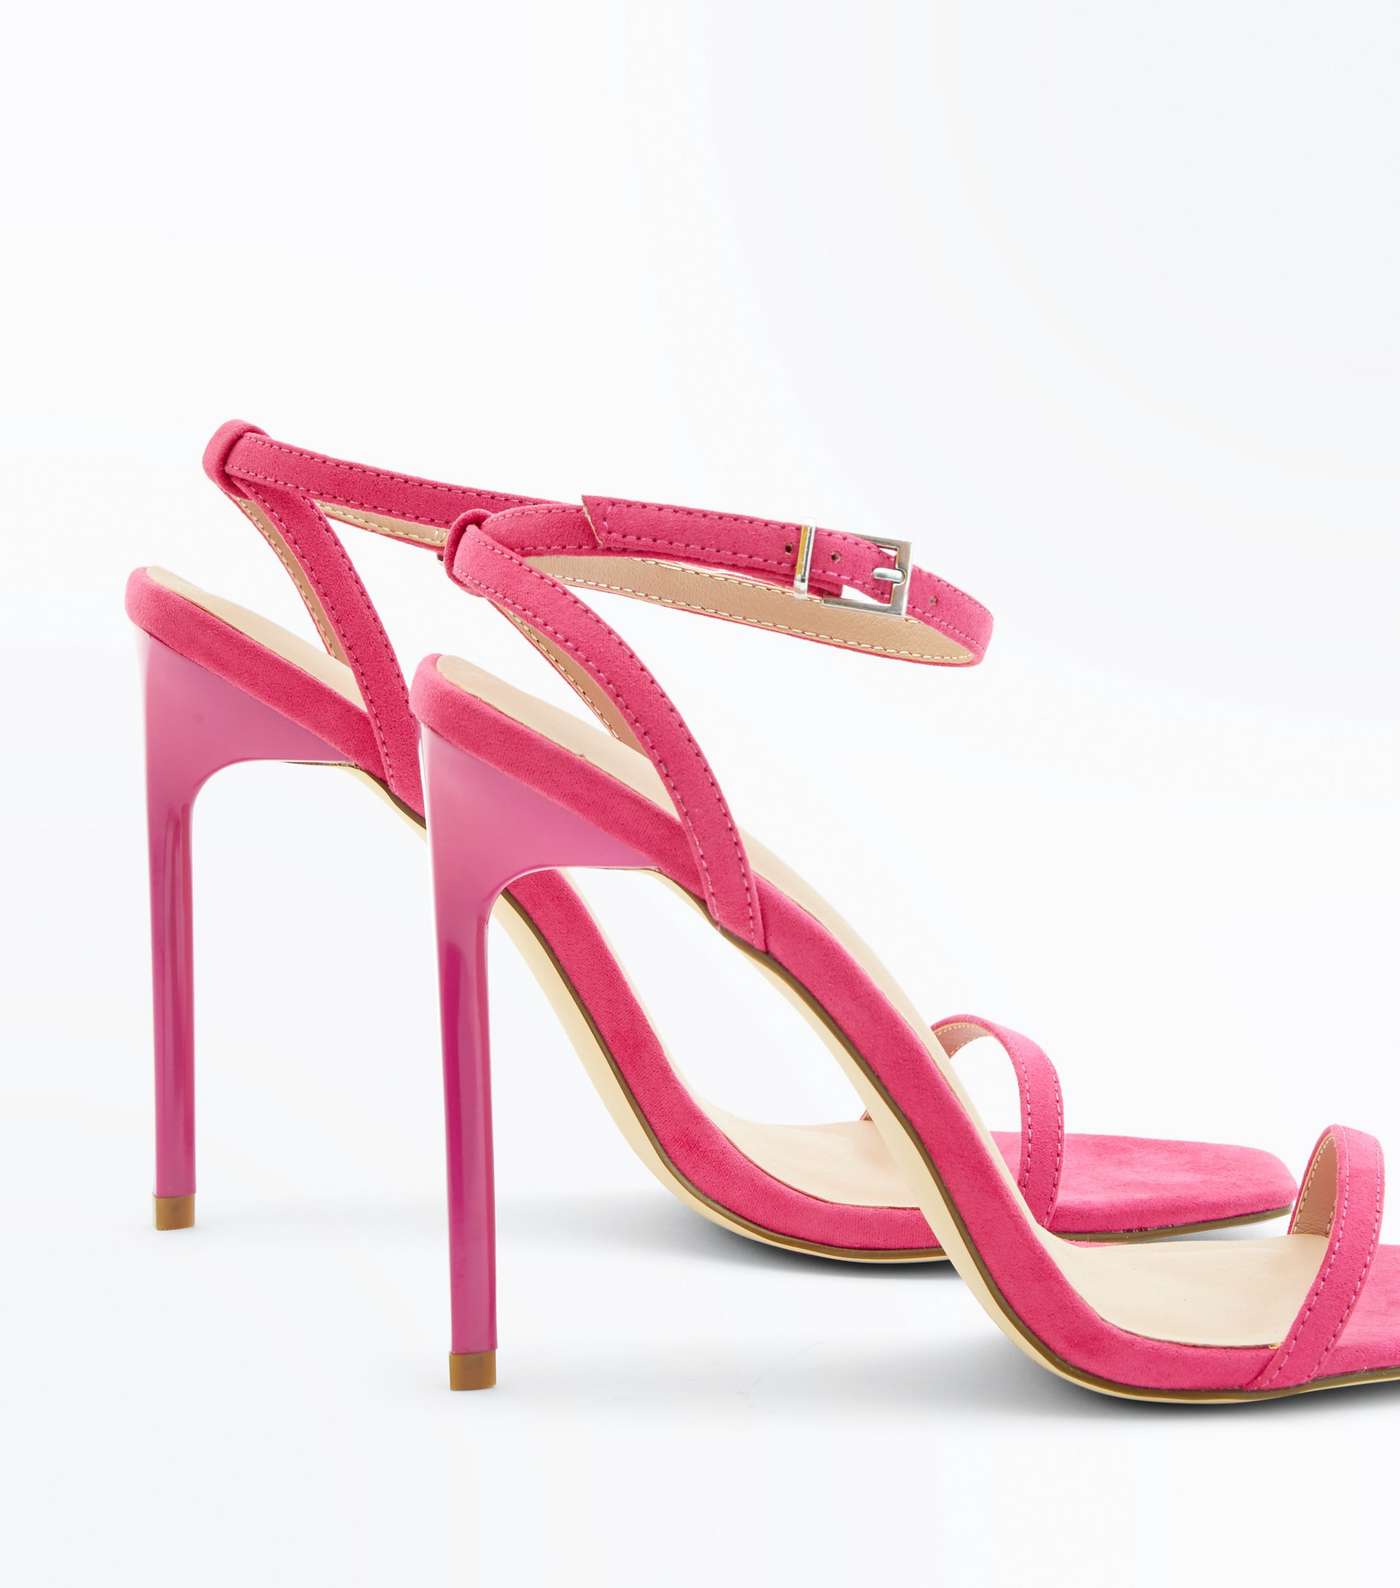 Bright Pink Suedette Barely There Stiletto Sandals Image 4